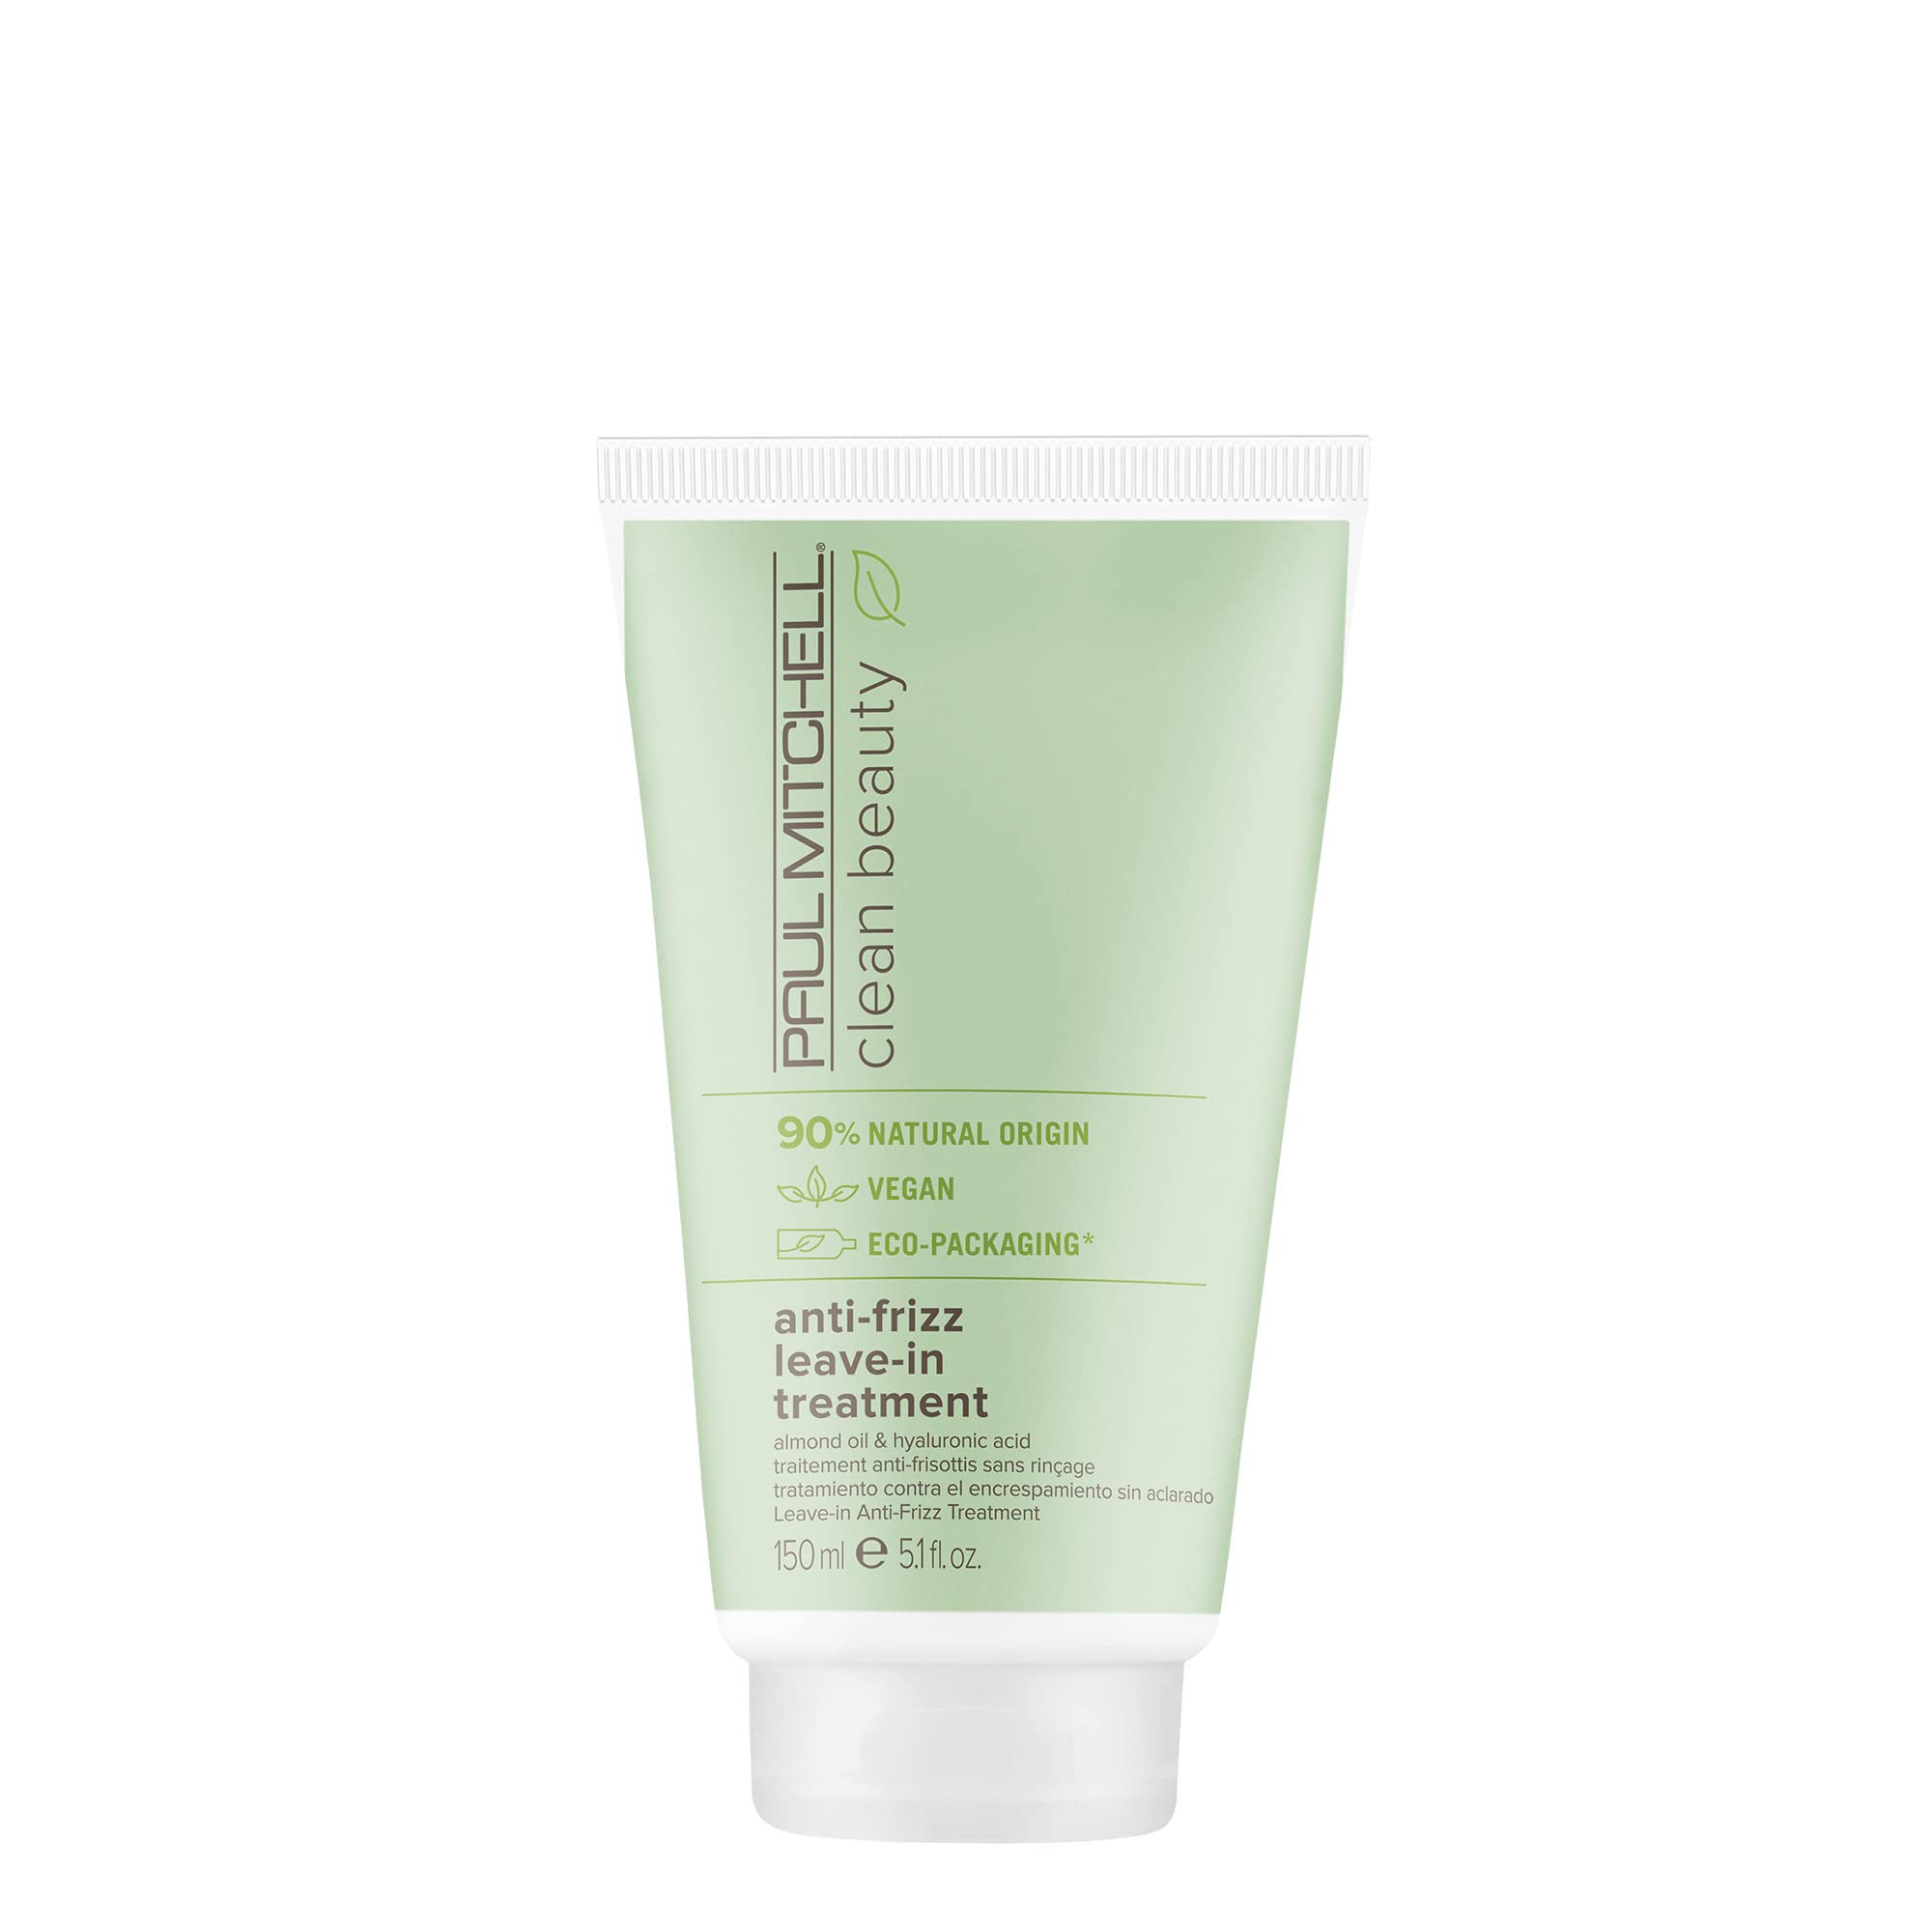 Paul Mitchell Clean Beauty Anti-Frizz Leave-In Treatment, Leave-In Conditioner, Anti-Humidity, For Textured, Frizz-Prone Hair